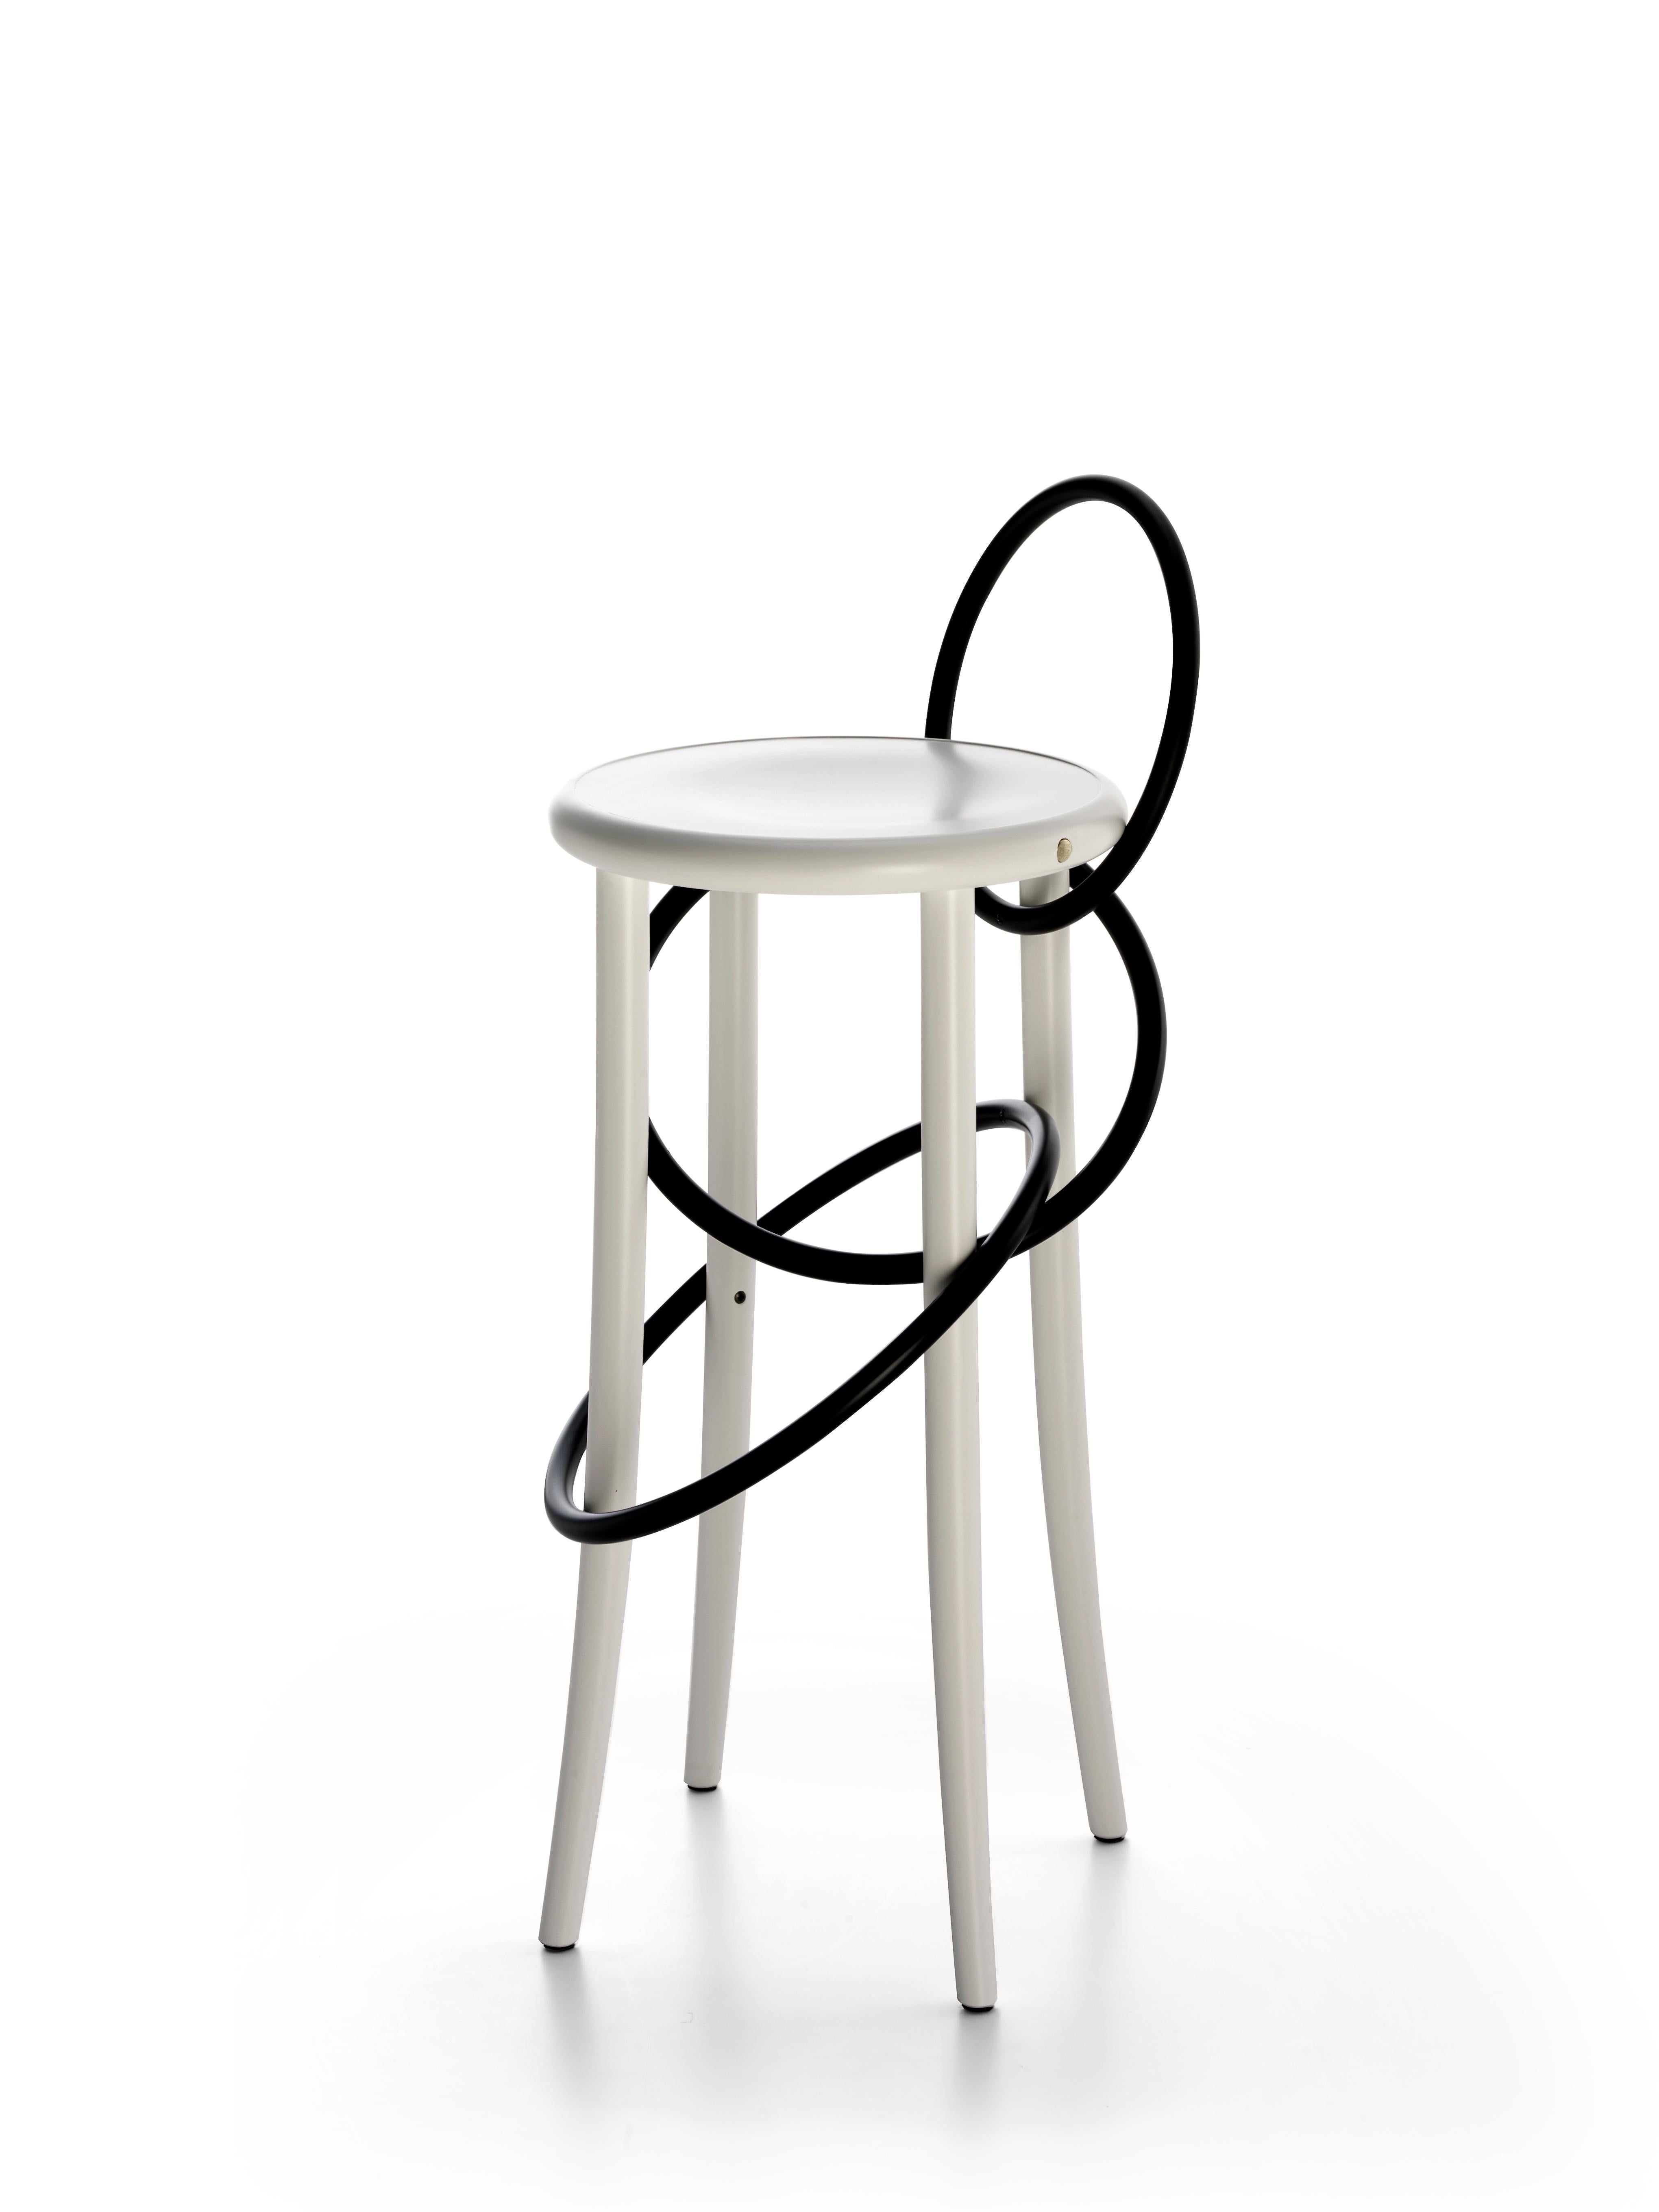 The light and playful circus theme is at the core of the Cirque family of stools designed by Martino Gamper for Wiener GTV Design. The bent element, which is the brand’s signature trait, is surprisingly and unexpectedly inserted in the base of the